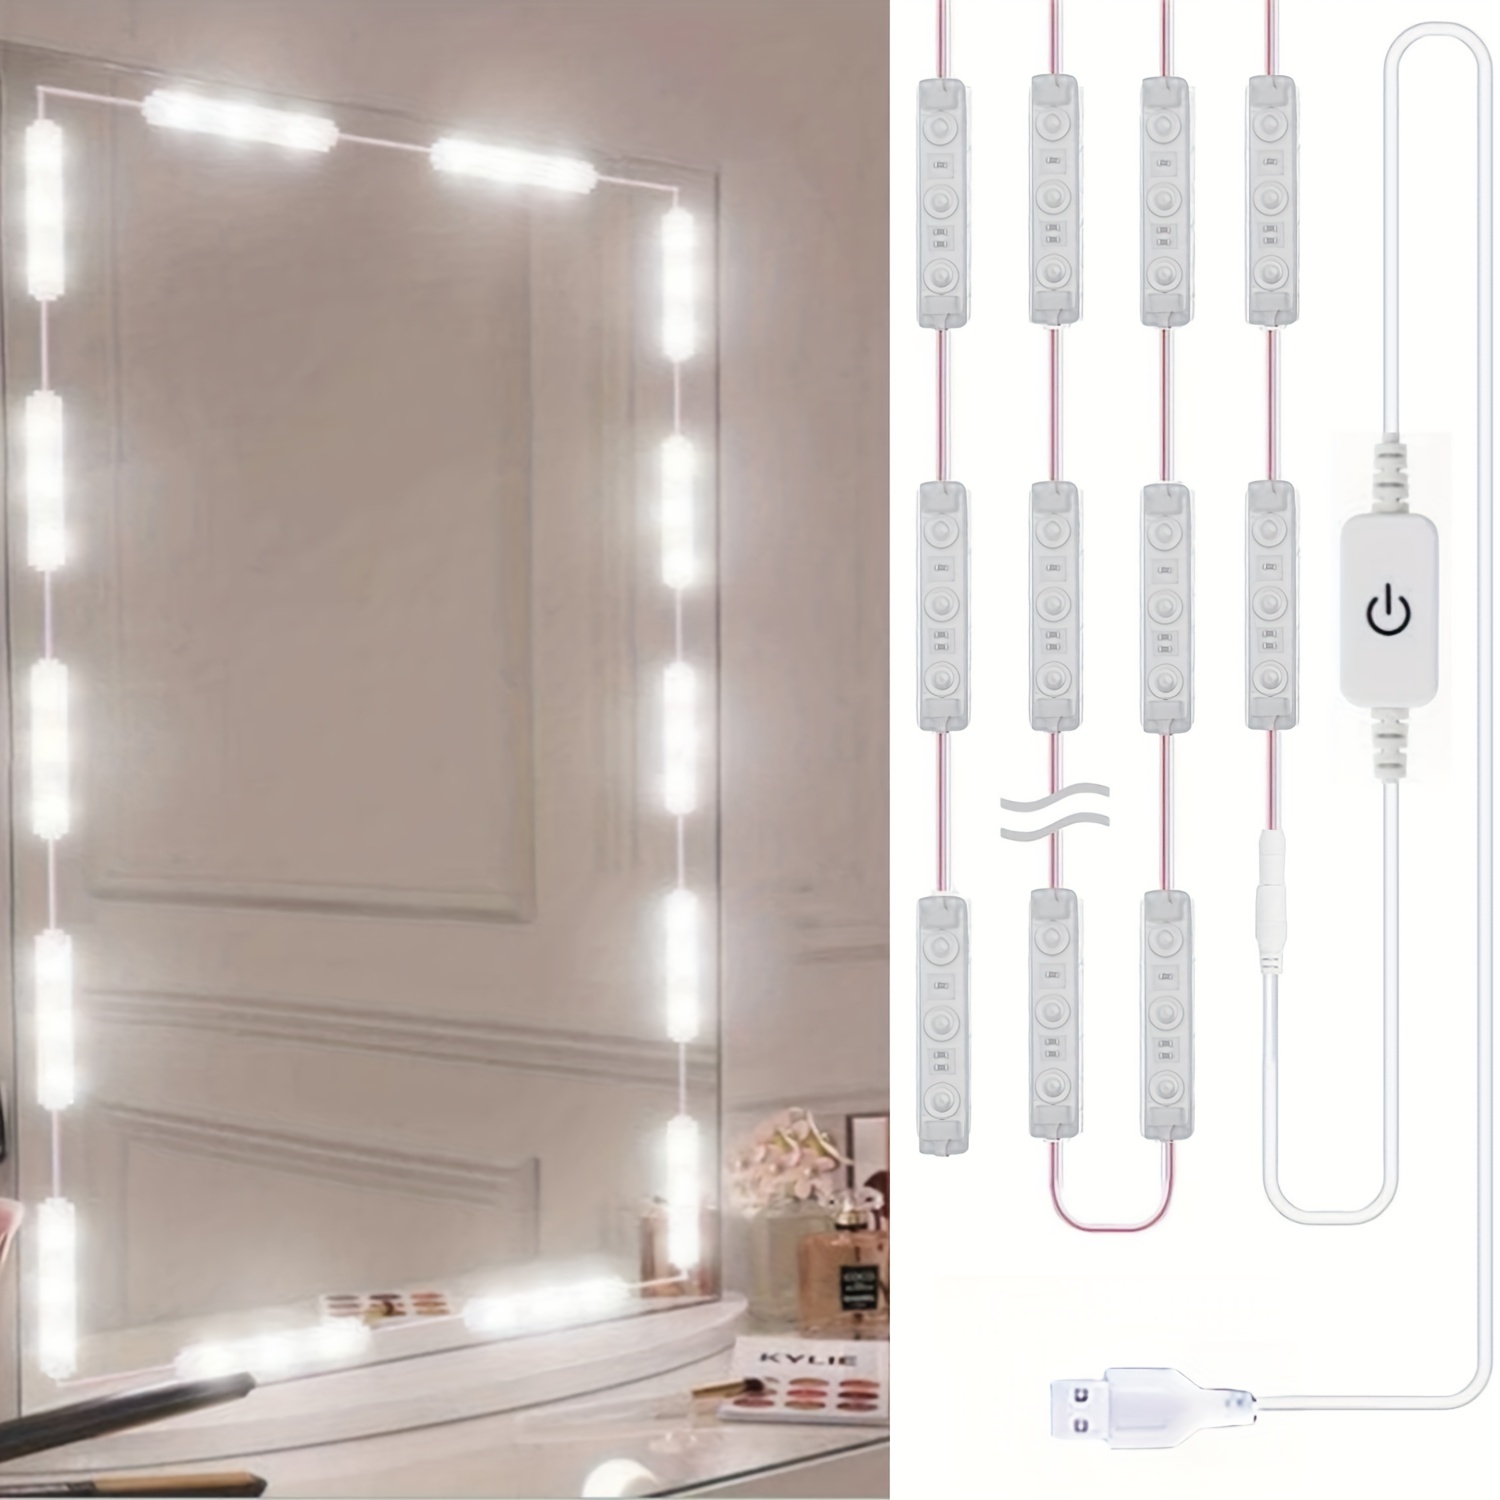 

Led Vanity Lights, Led Vanity Mirror Lights, Style Vanity Make Up Light, 6.56ft/10ft White Led, Dimmable Touch Control Lights Strip, For Makeup Vanity Table & Bathroom Mirror